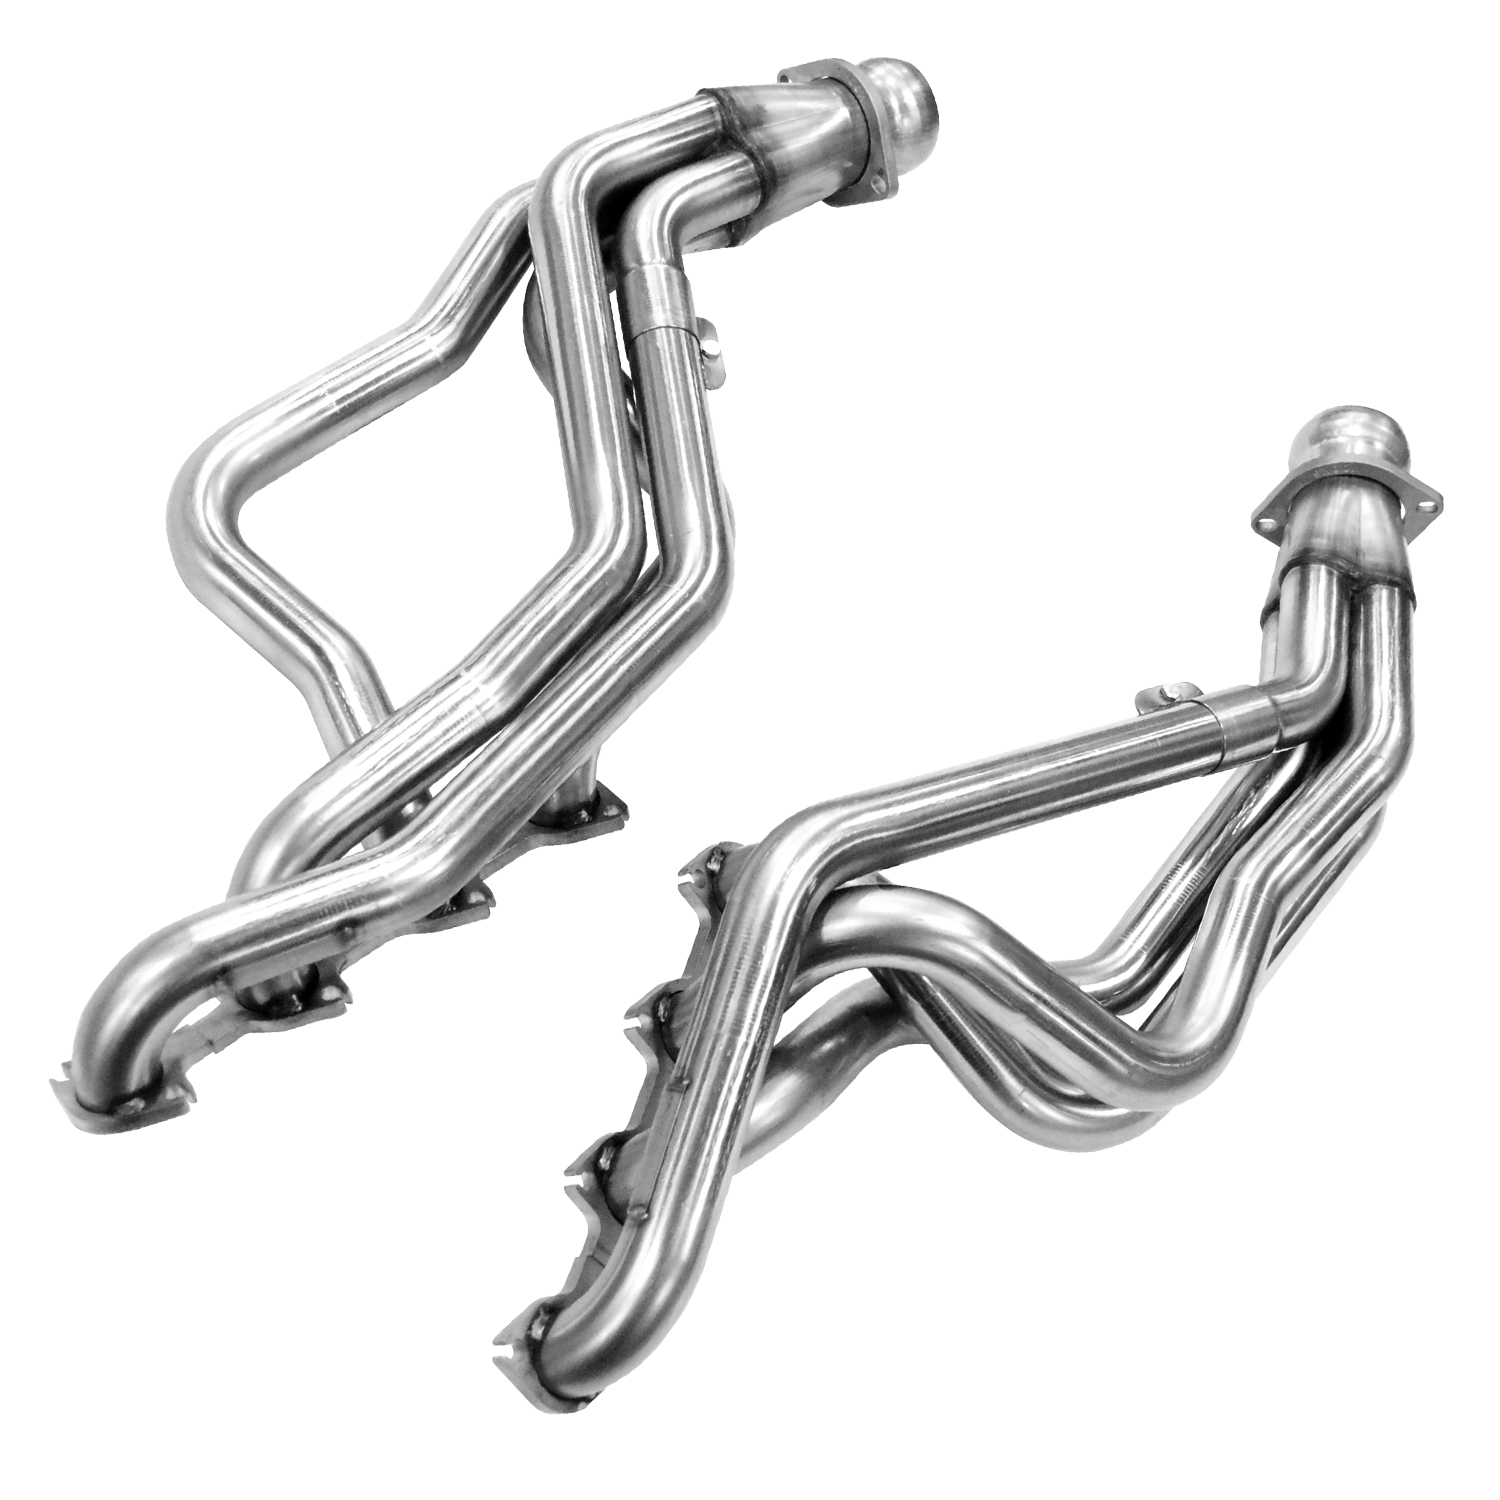 Stainless Steel Headers 1.625 x 2.5" Incl. 1 Pair 24" O2 Extension Harnesses